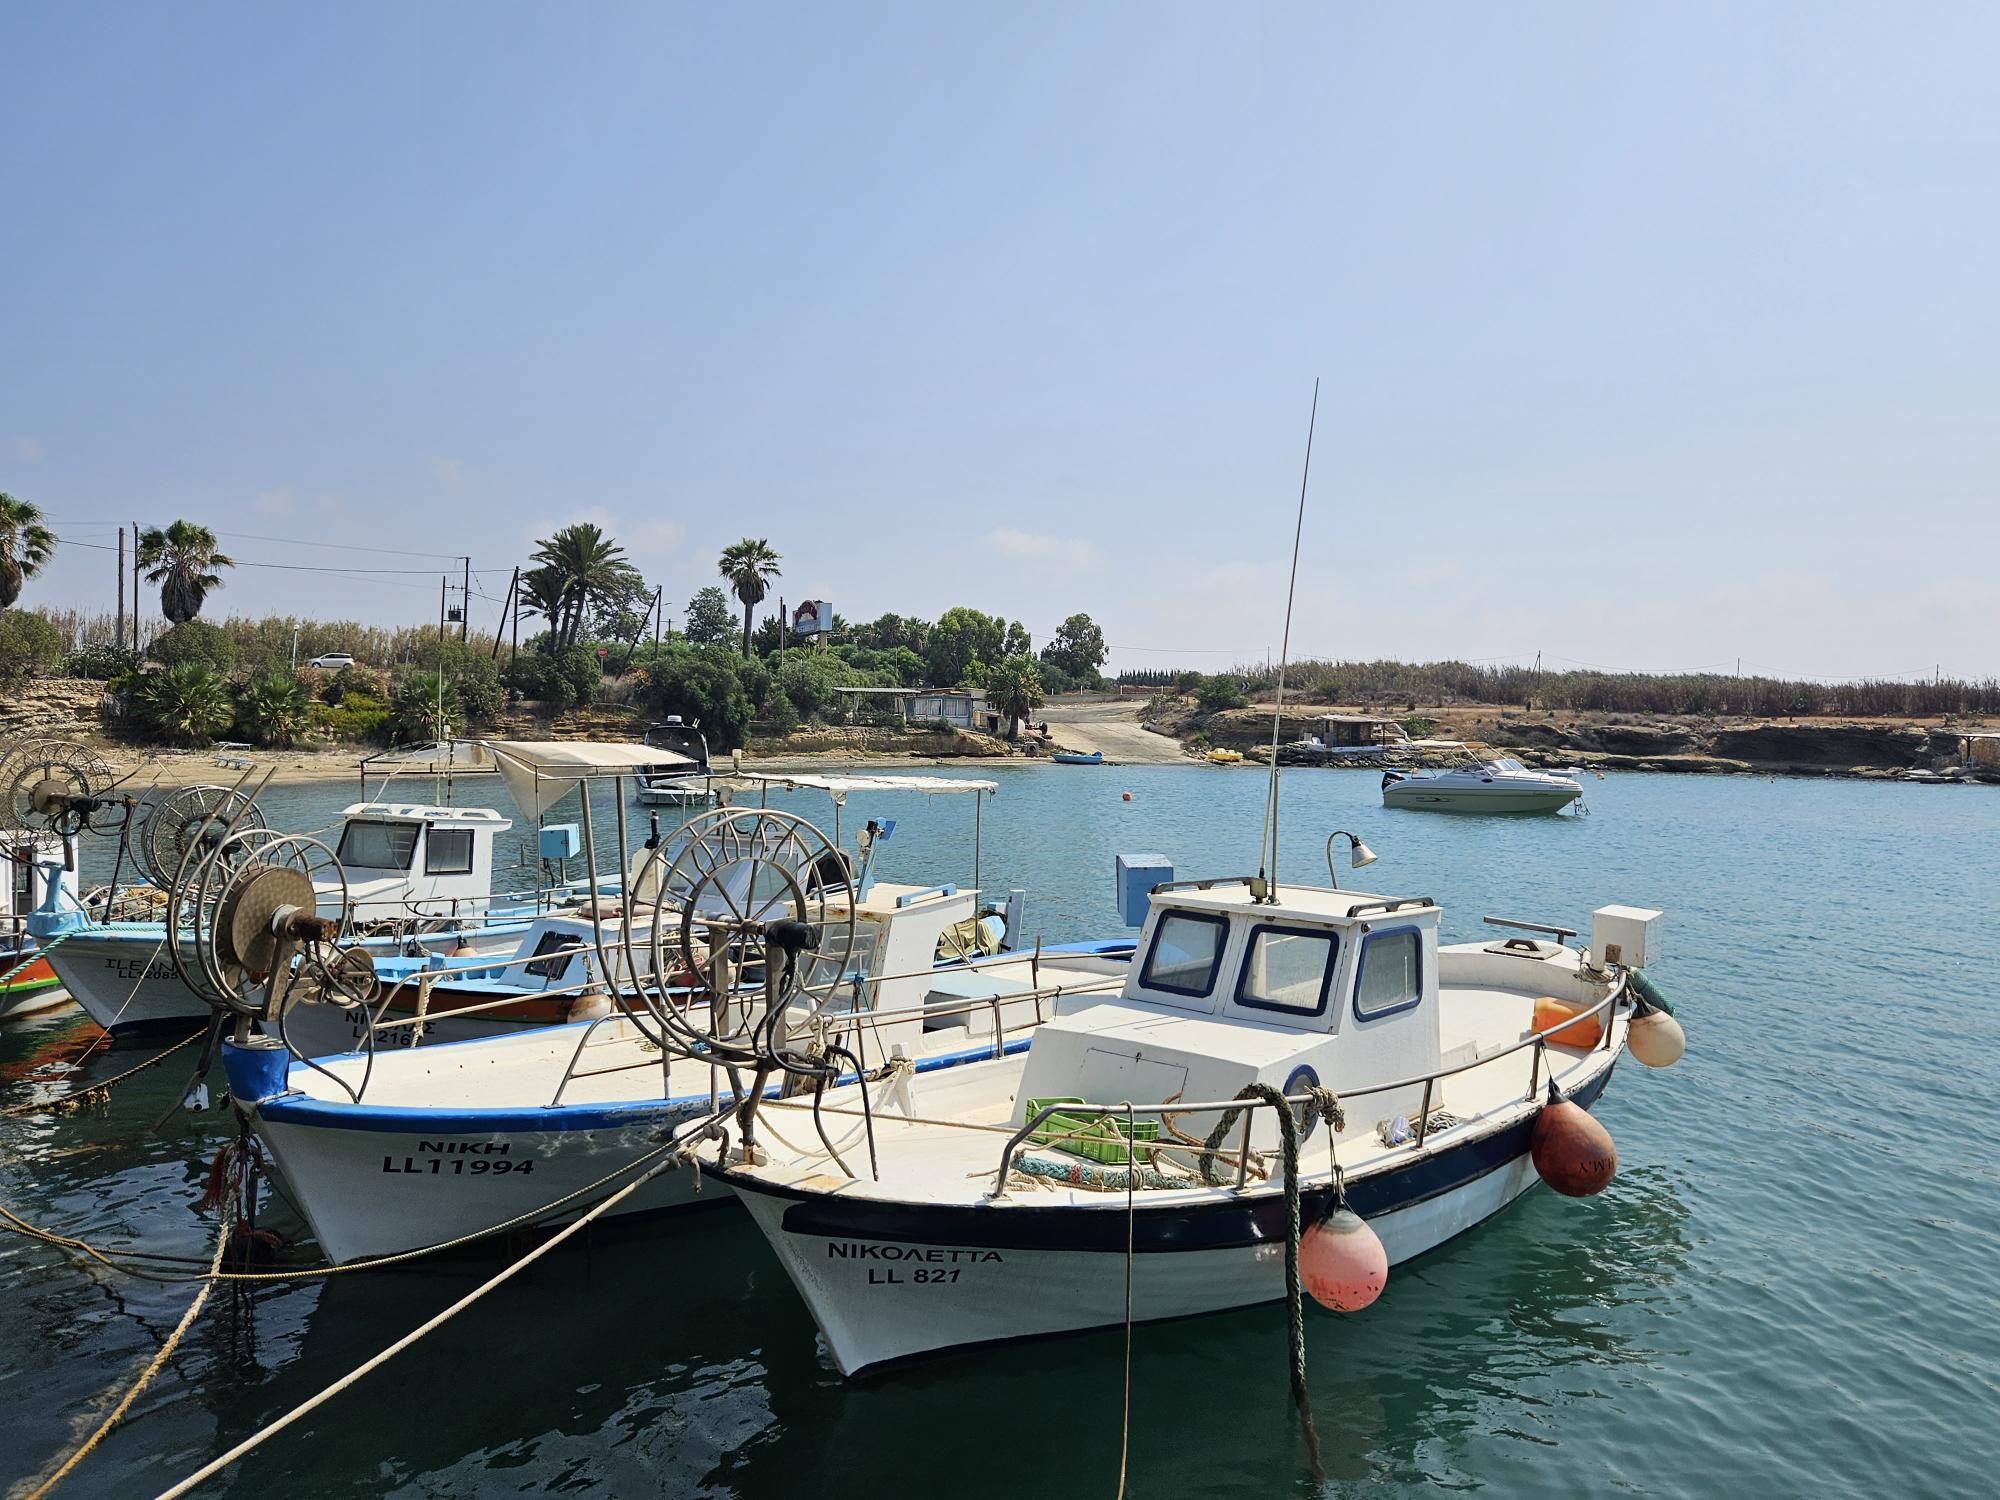 The fishing village in Ormidia